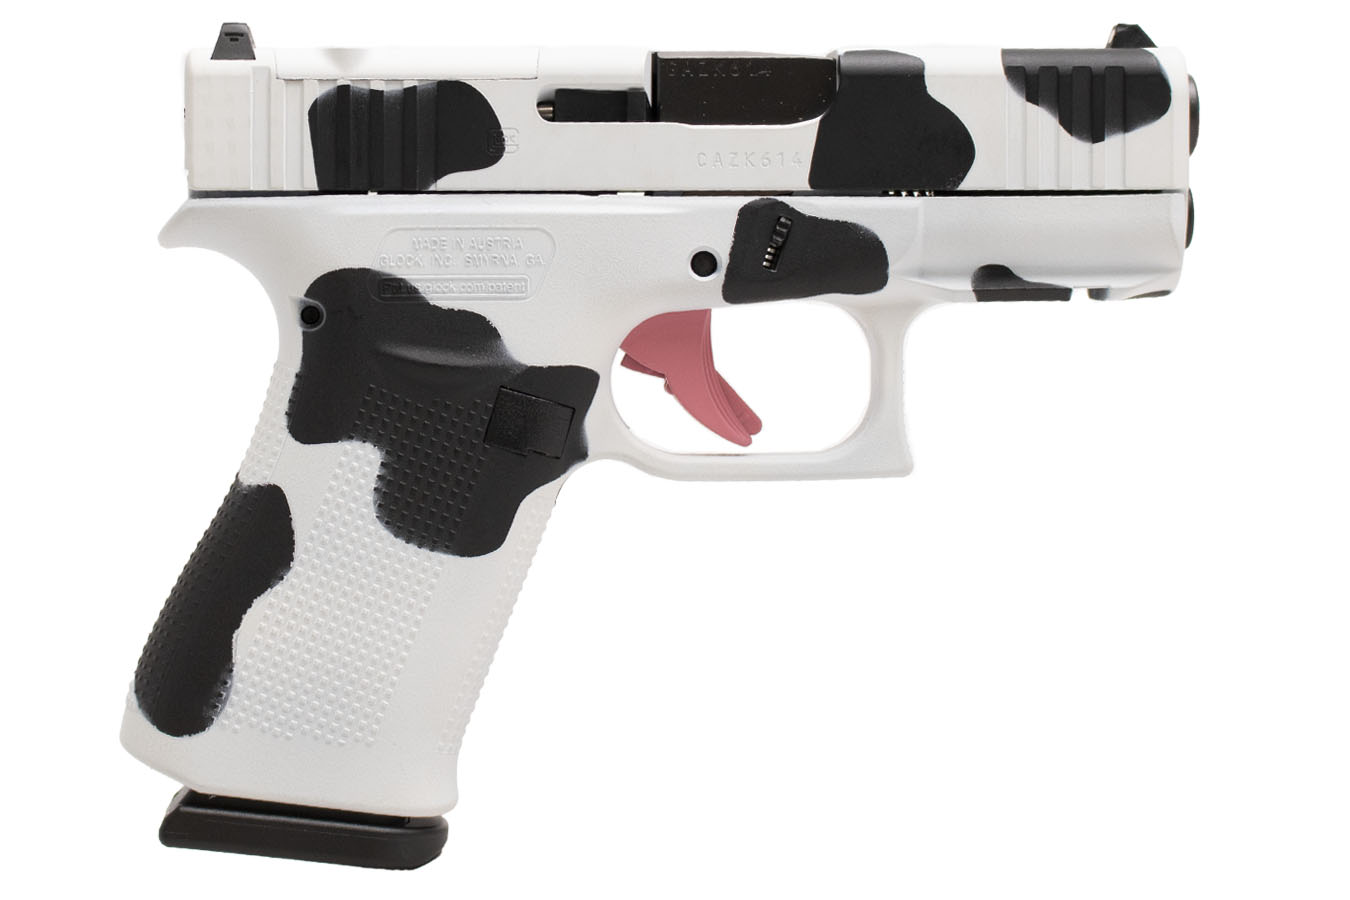 No. 38 Best Selling: GLOCK G43X MOS 9MM COW PRINT CERAKOTE 3.41 IN BBL 10 RD MAG